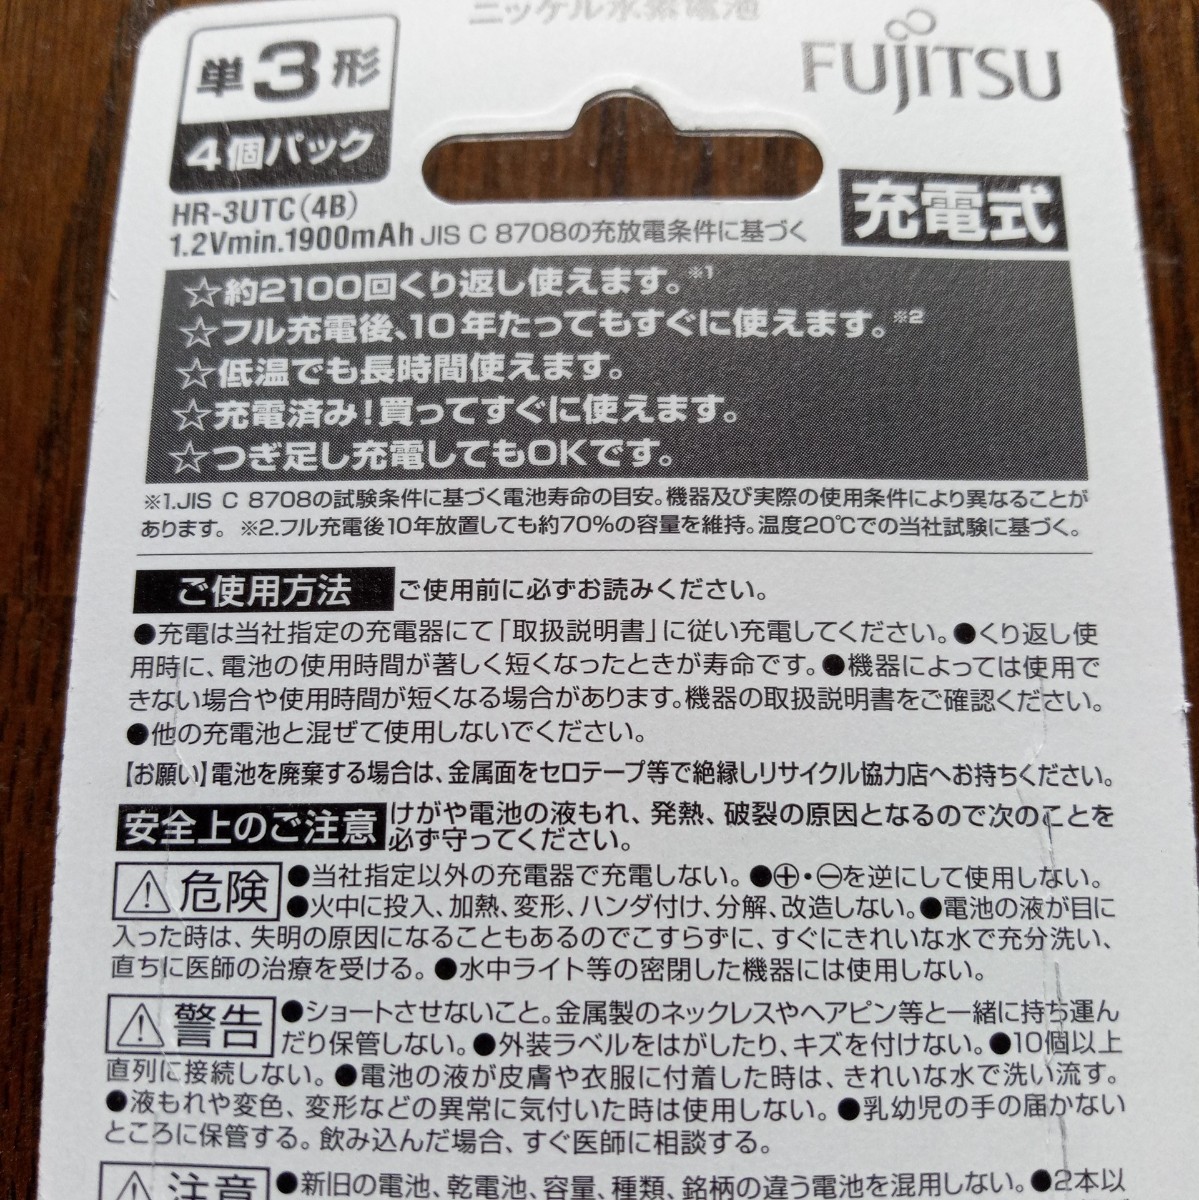 [ including carriage ] Fujitsu made in Japan single 3 nickel water element rechargeable battery 2 pack min.1900mAh 4 pcs set eneloop interchangeable HR-3UTC(4B) single three AA FDK unopened new goods 